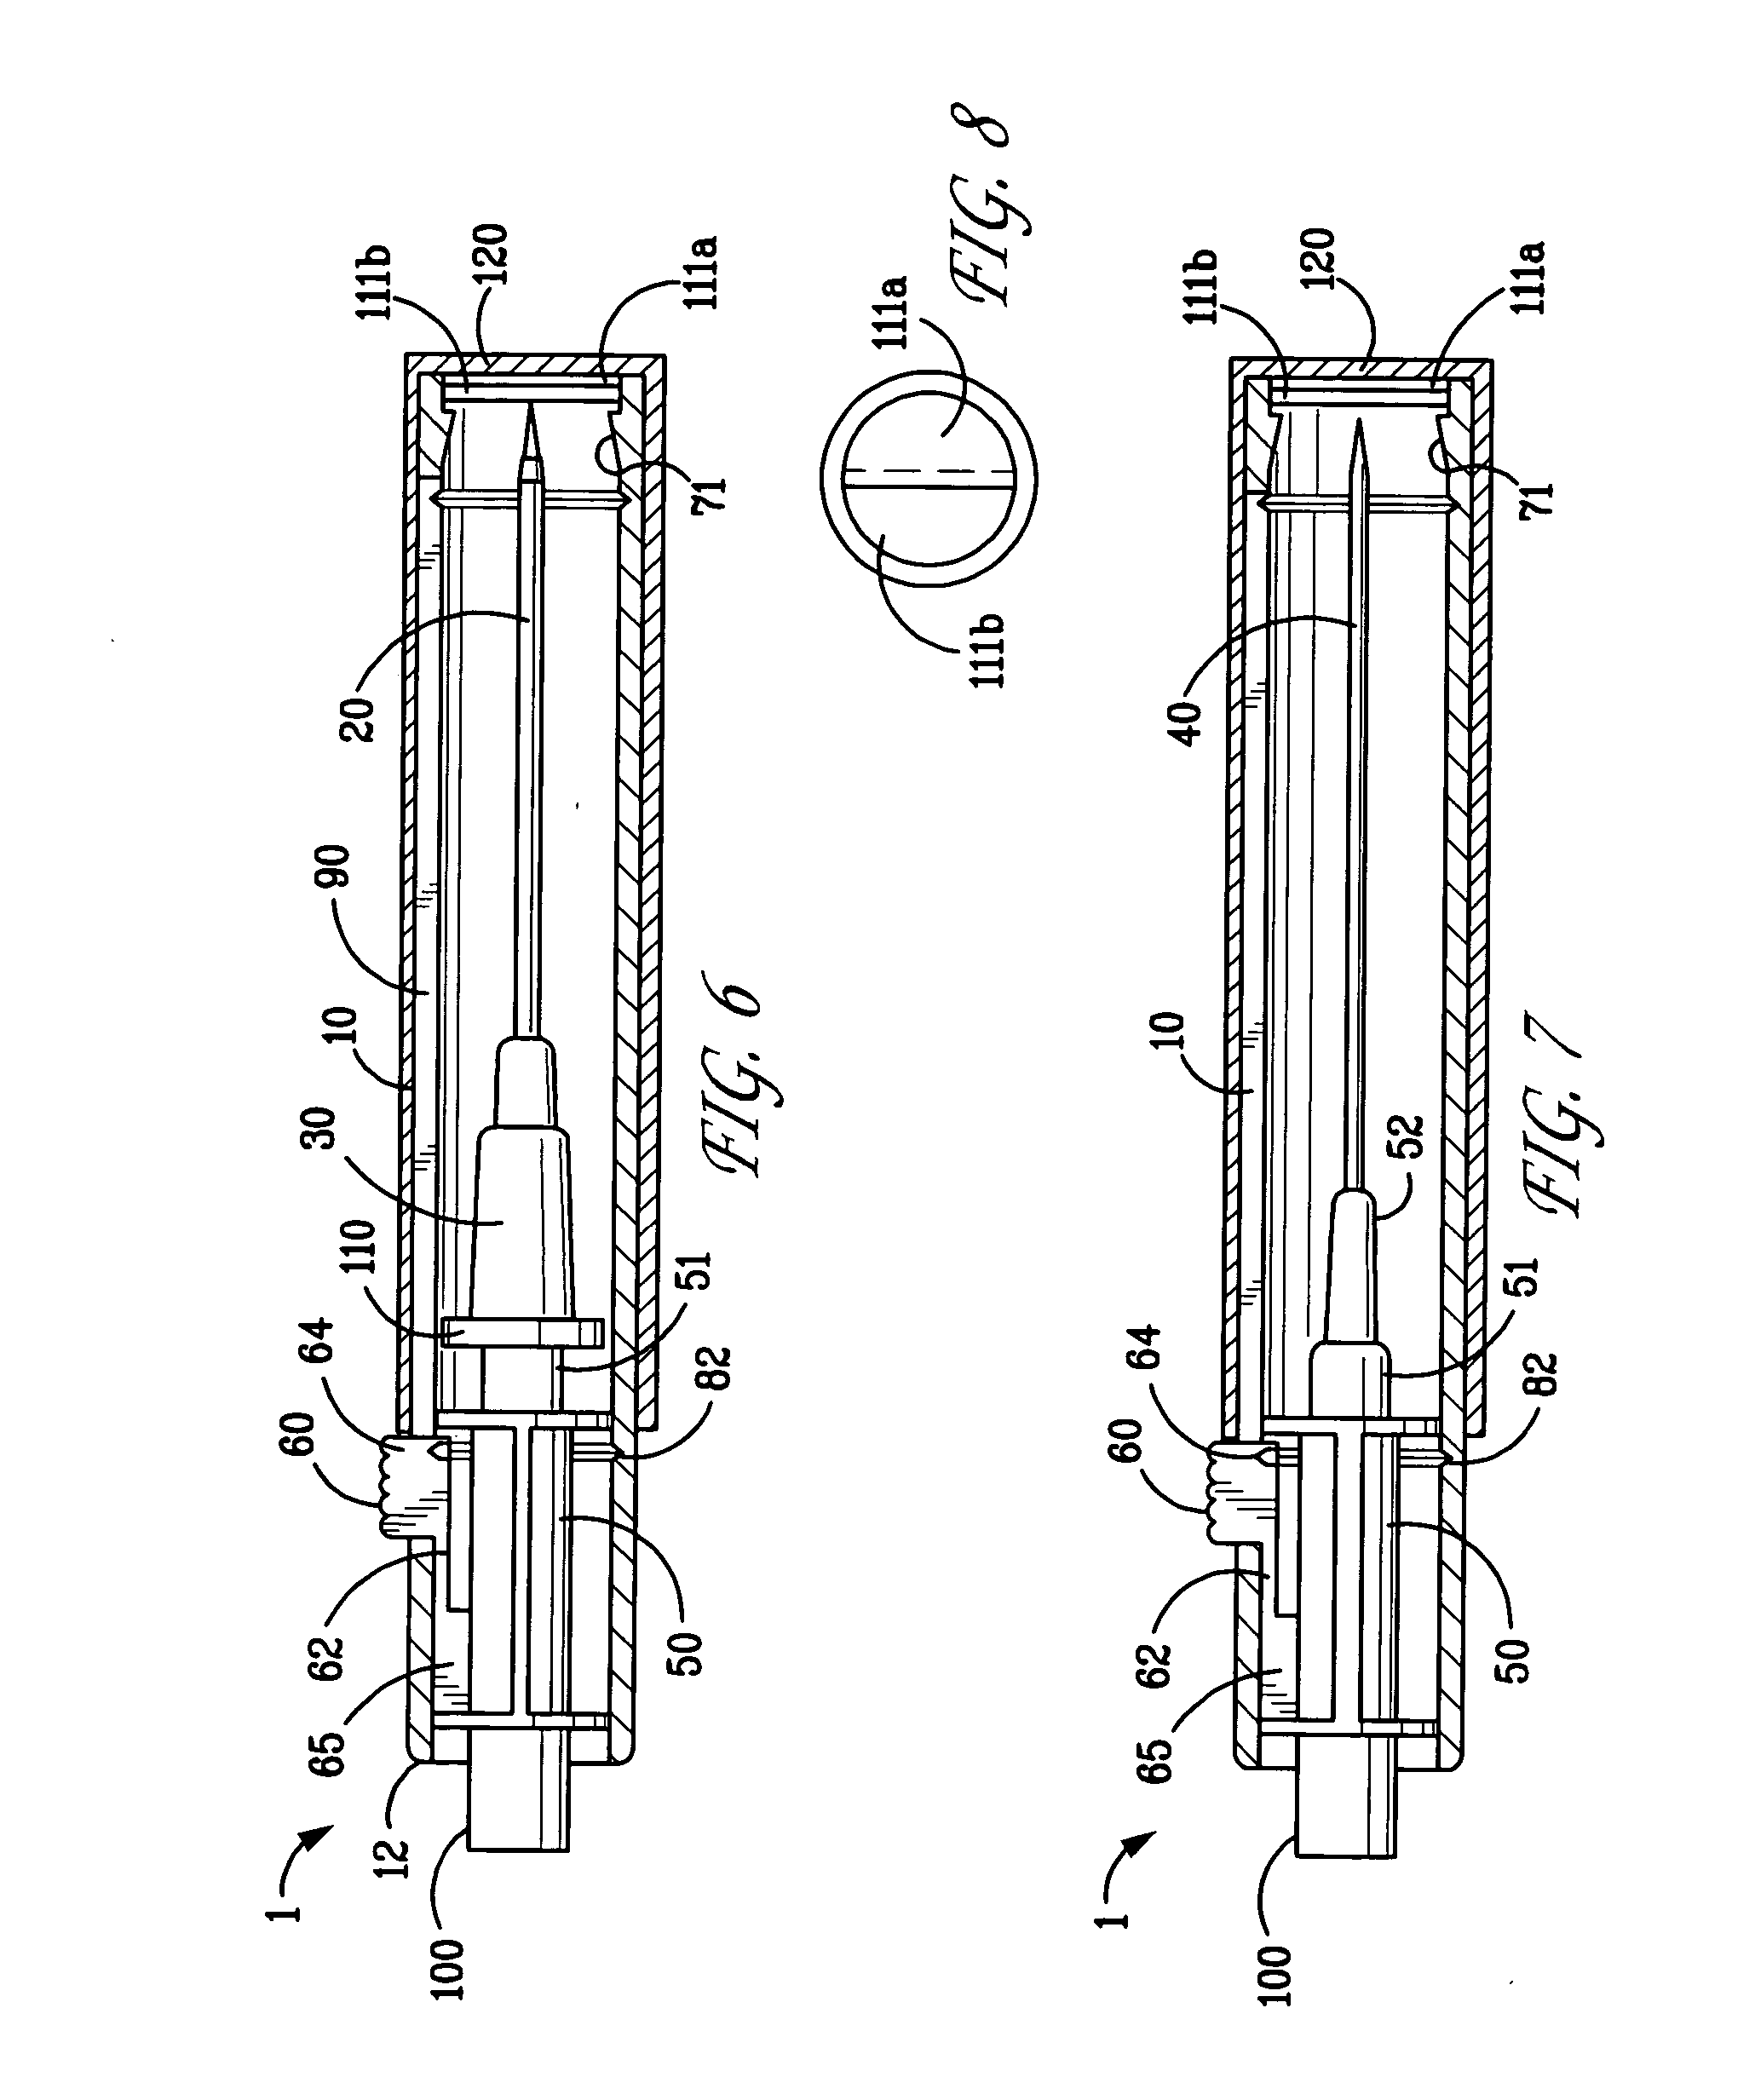 Intravenous catheter and insertion device